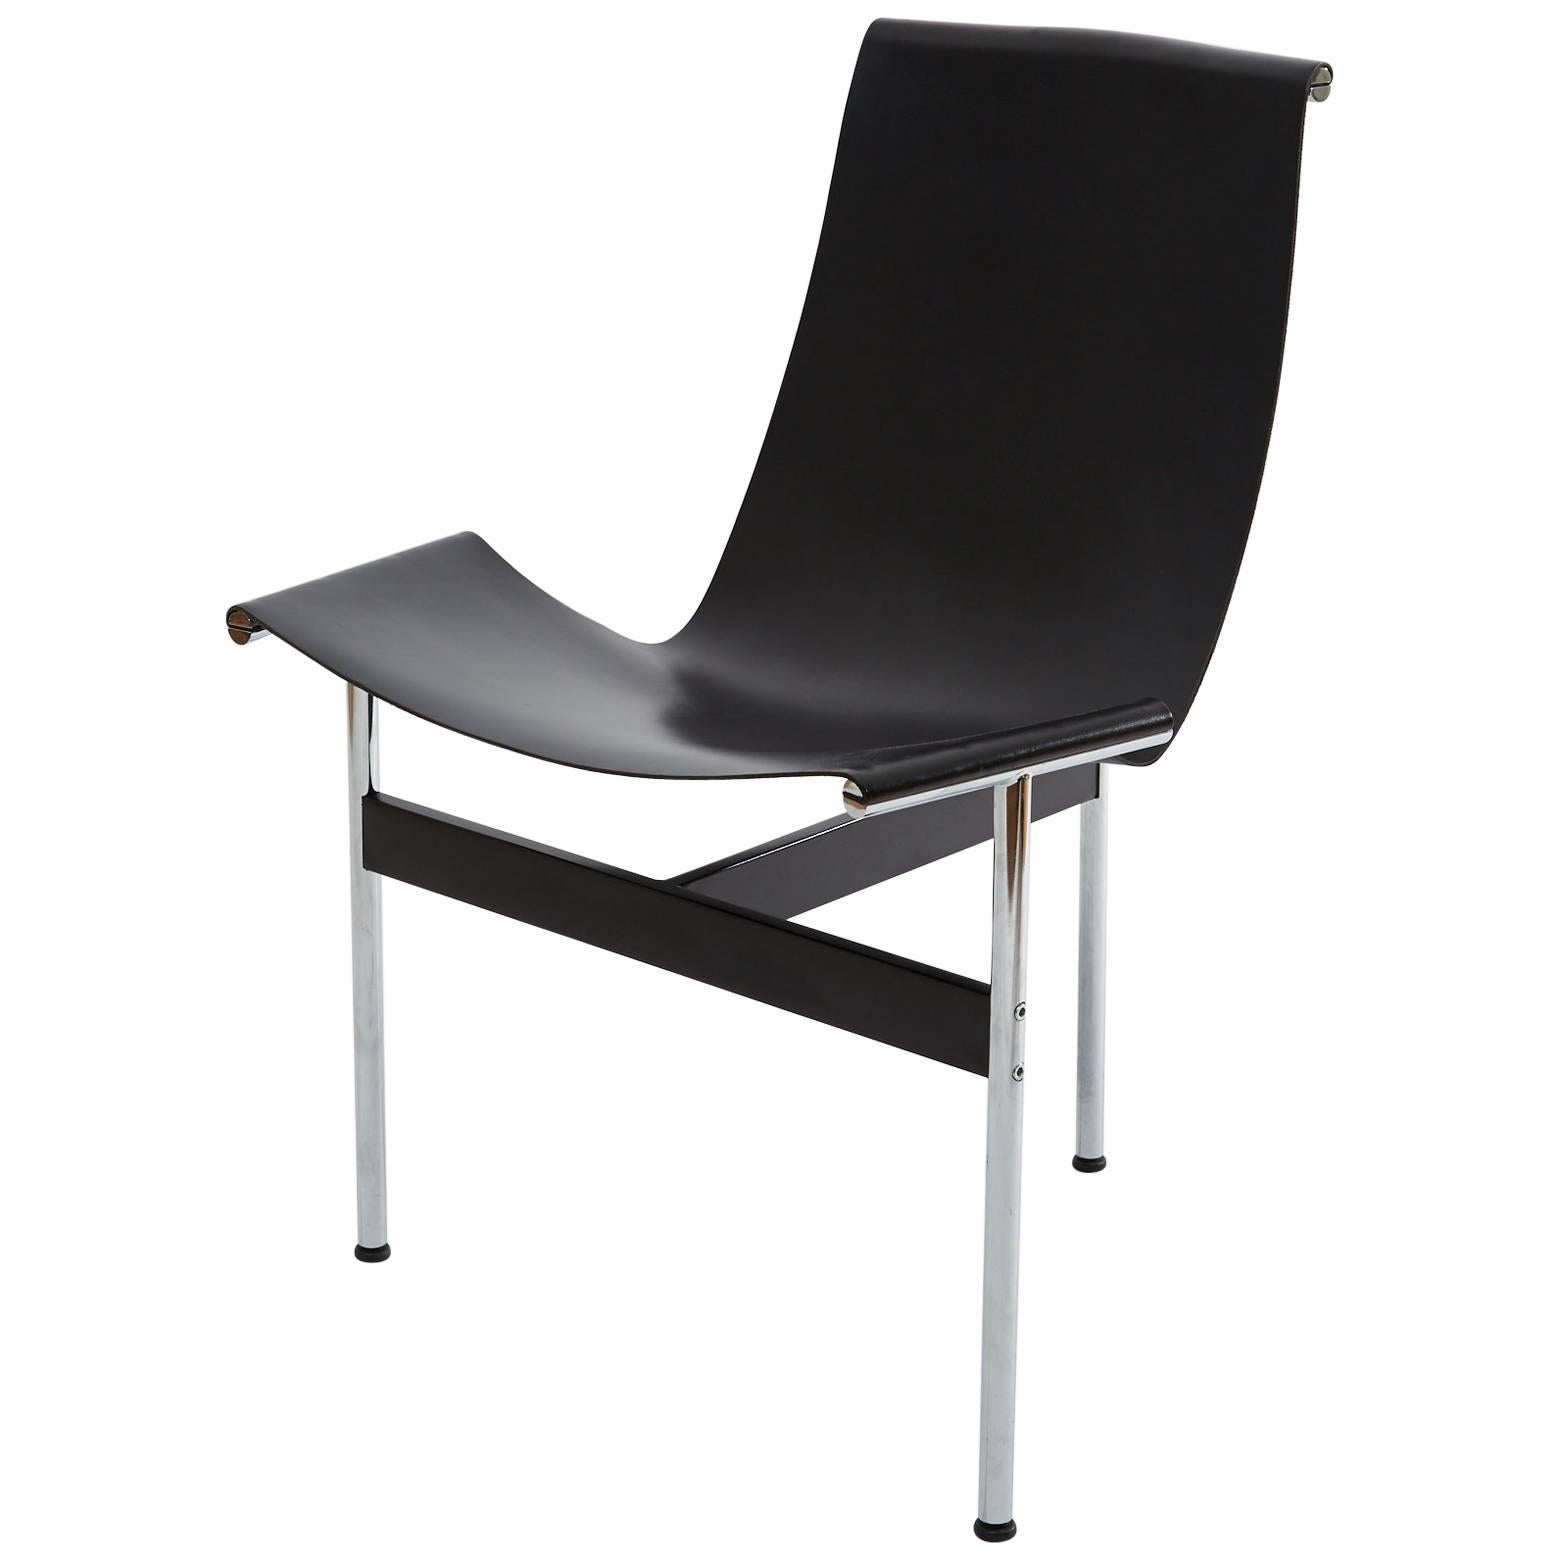 Katavolos Littell Kelley New York T-Chair Chrome Tripod and Black Leather, 1952 For Sale